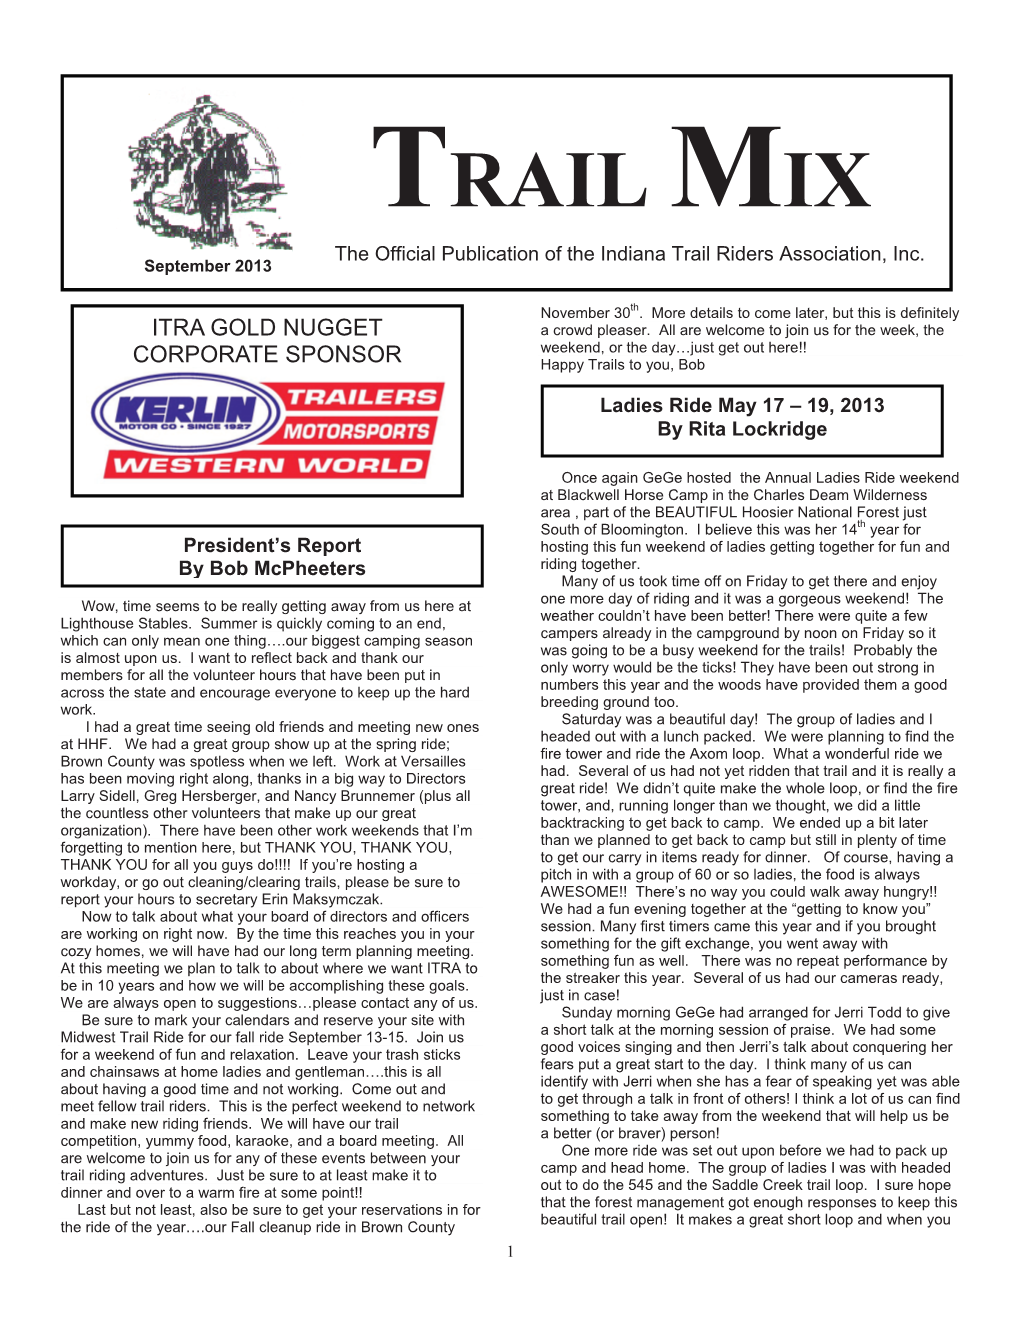 TRAIL MIX the Official Publication of the Indiana Trail Riders Association, Inc